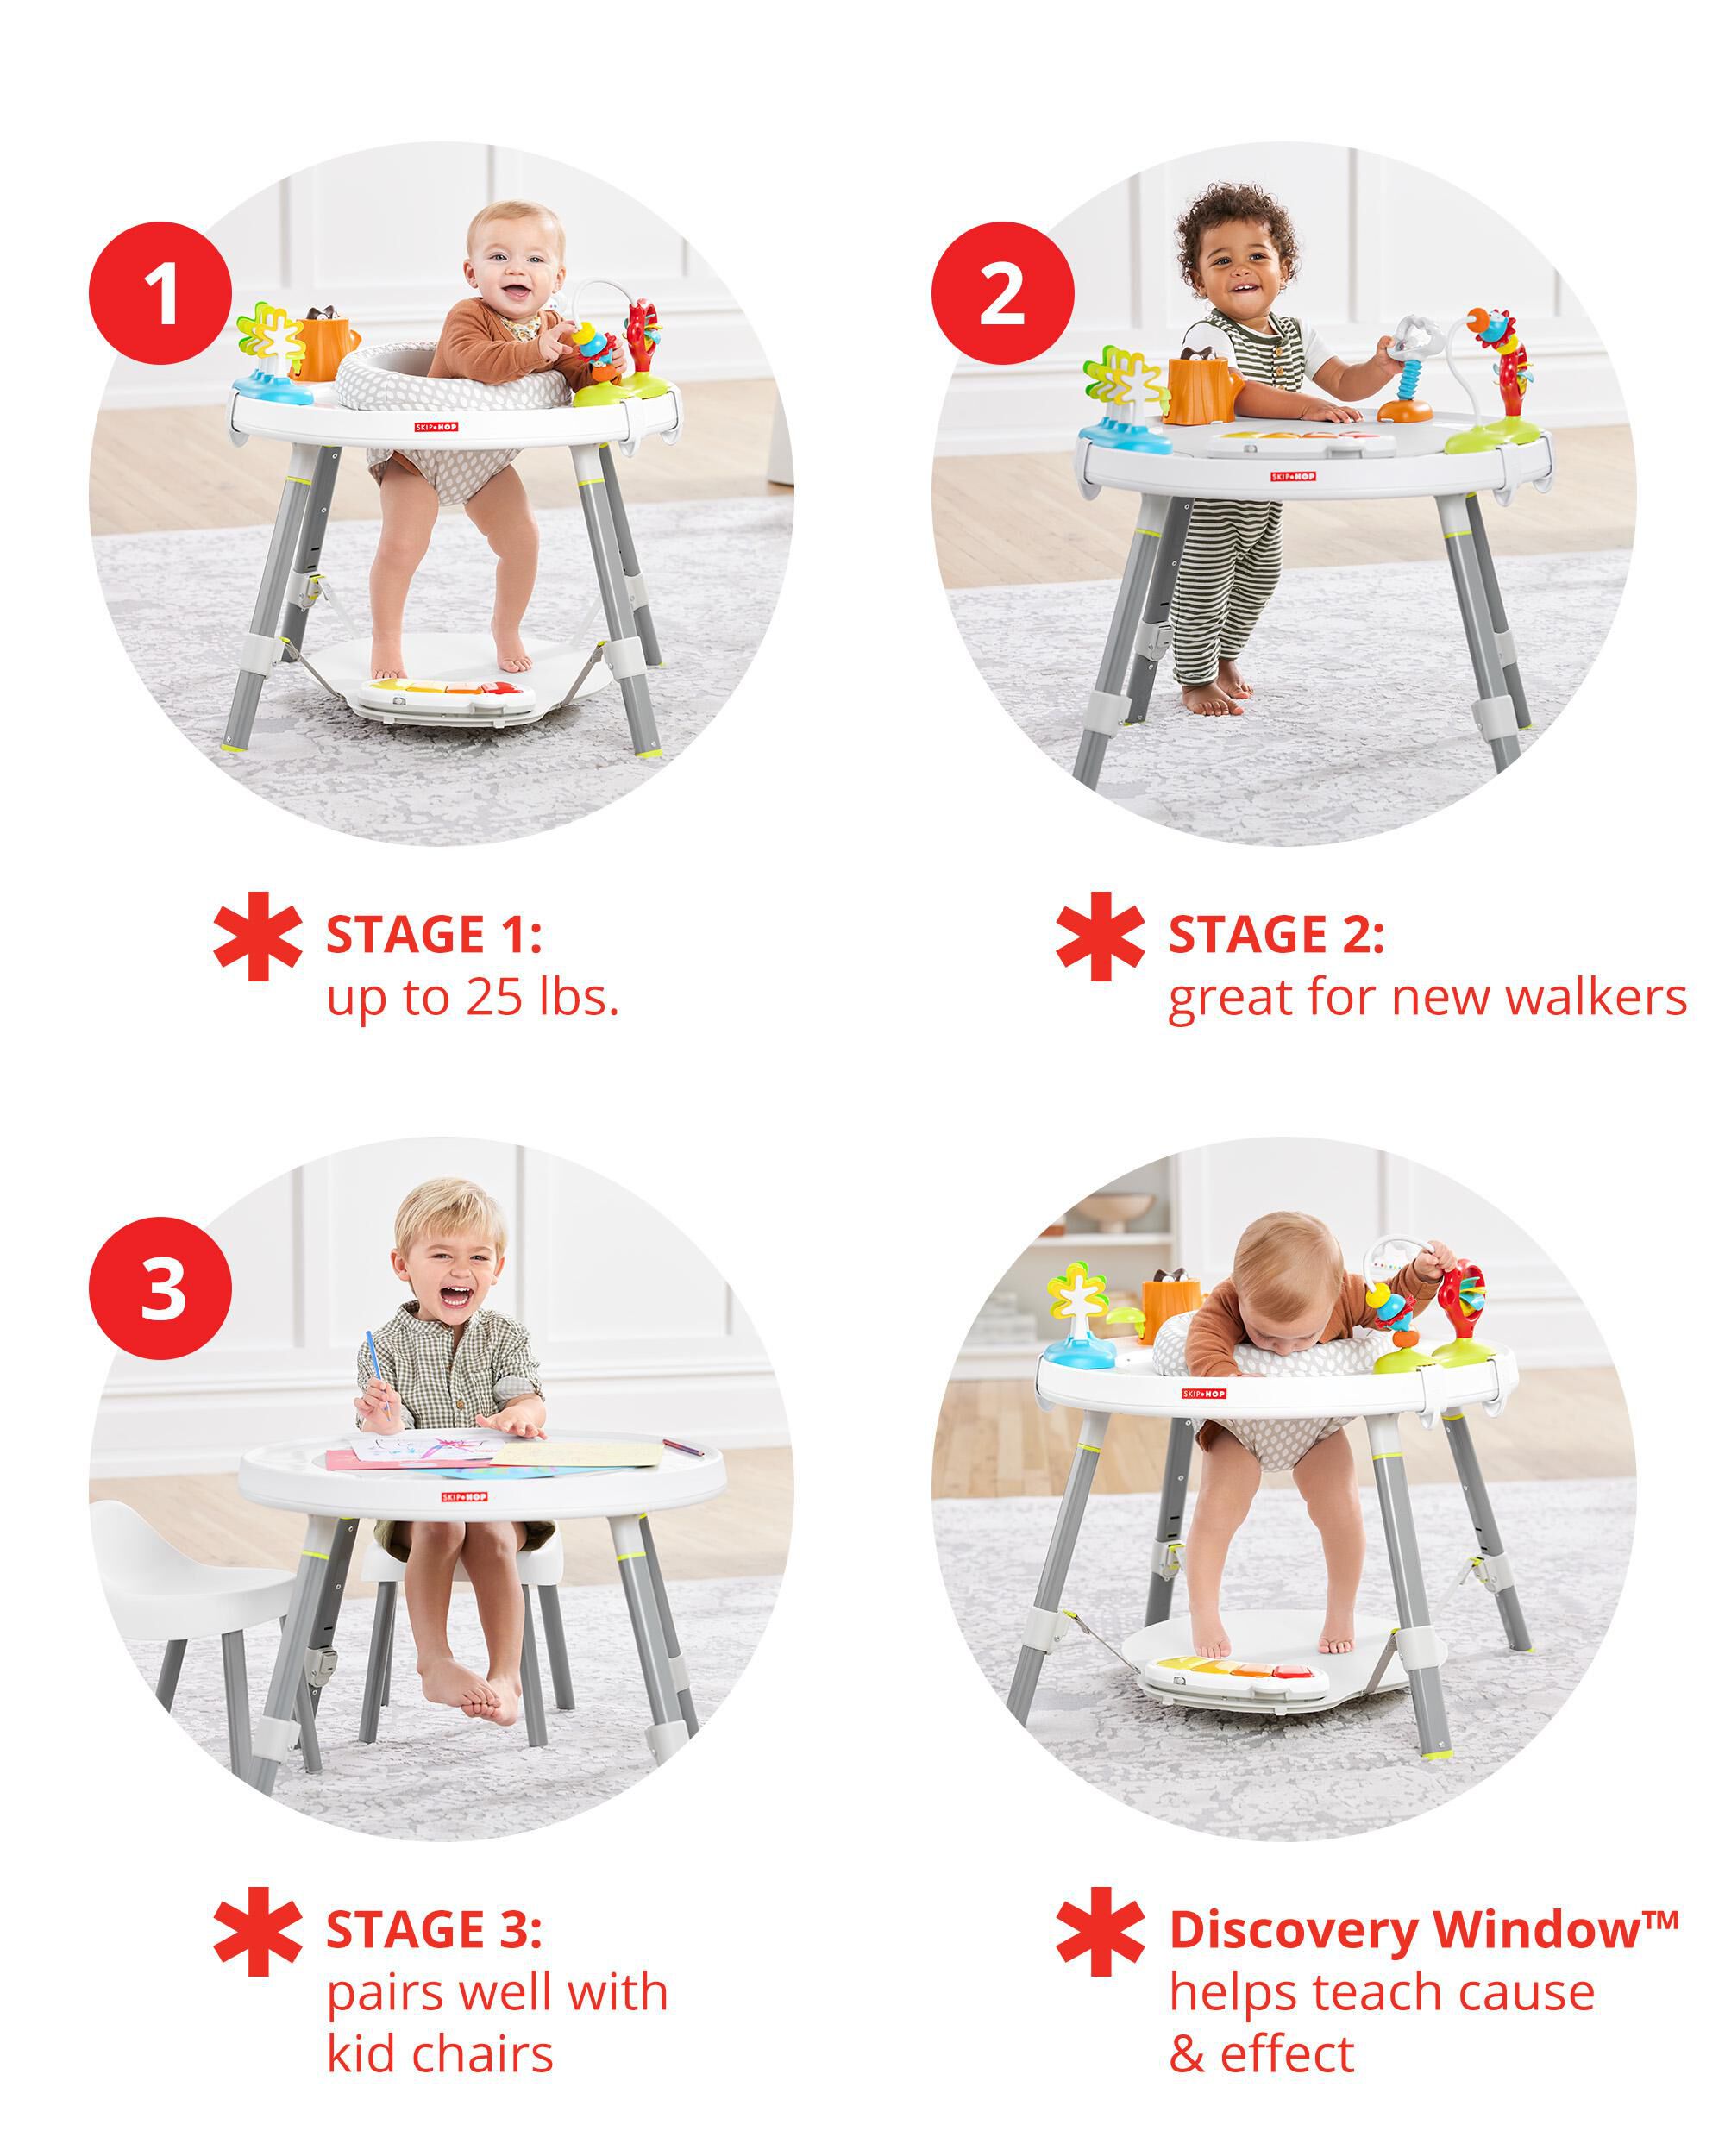 skip and hop activity center